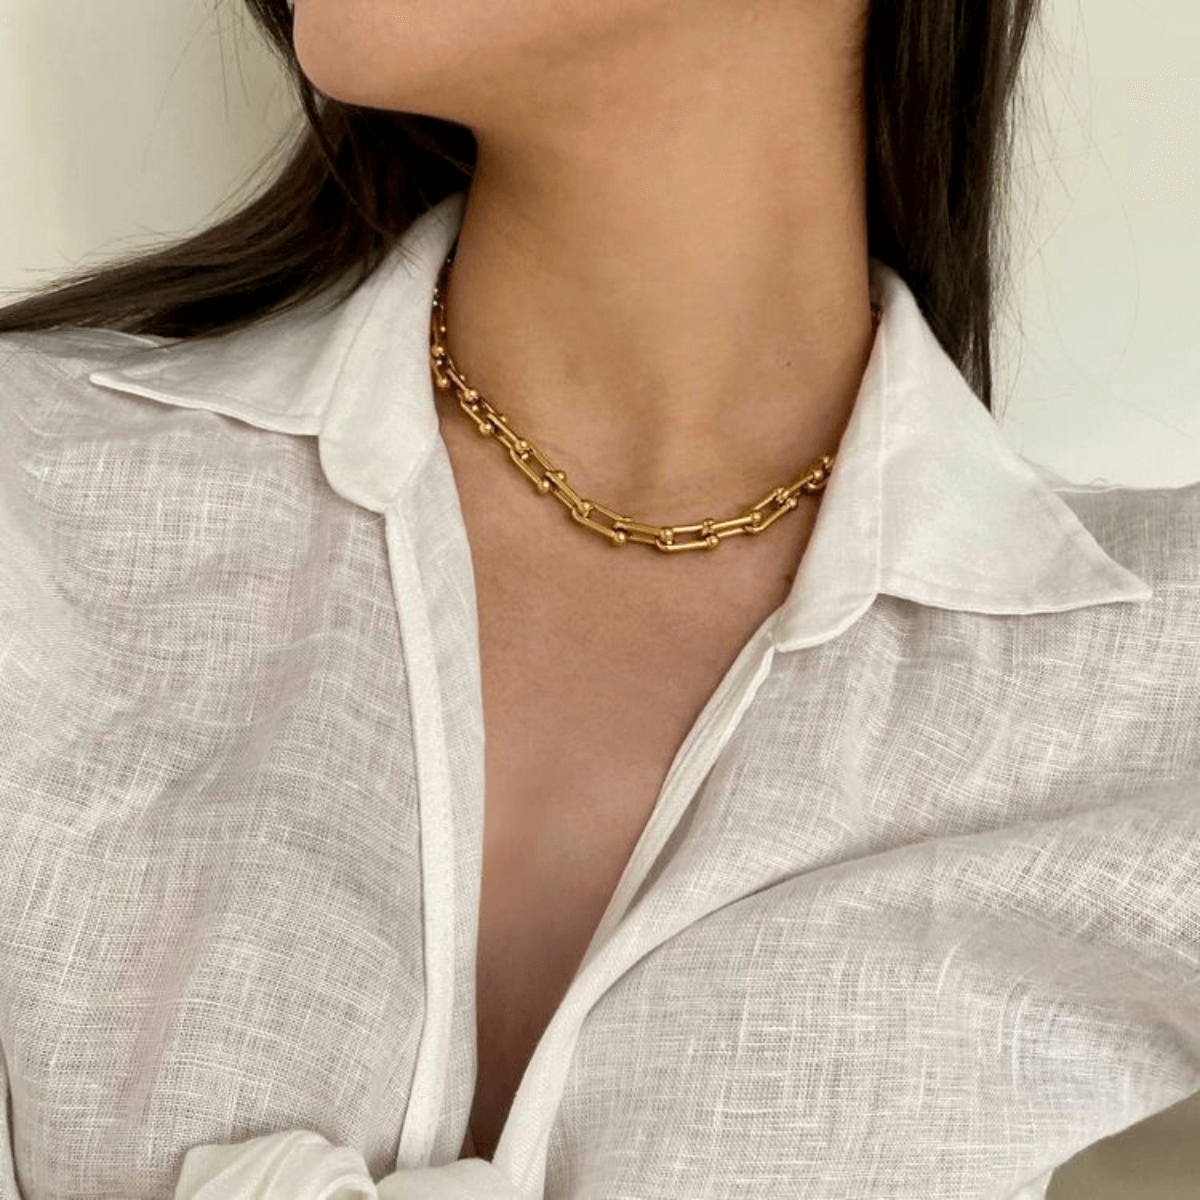 Best Gold Link Chain Necklace | Best Aesthetic Yellow Gold Graduated Link Necklace Chain Jewelry Gift for Women, Mother, Wife | Mason & Madison Co.